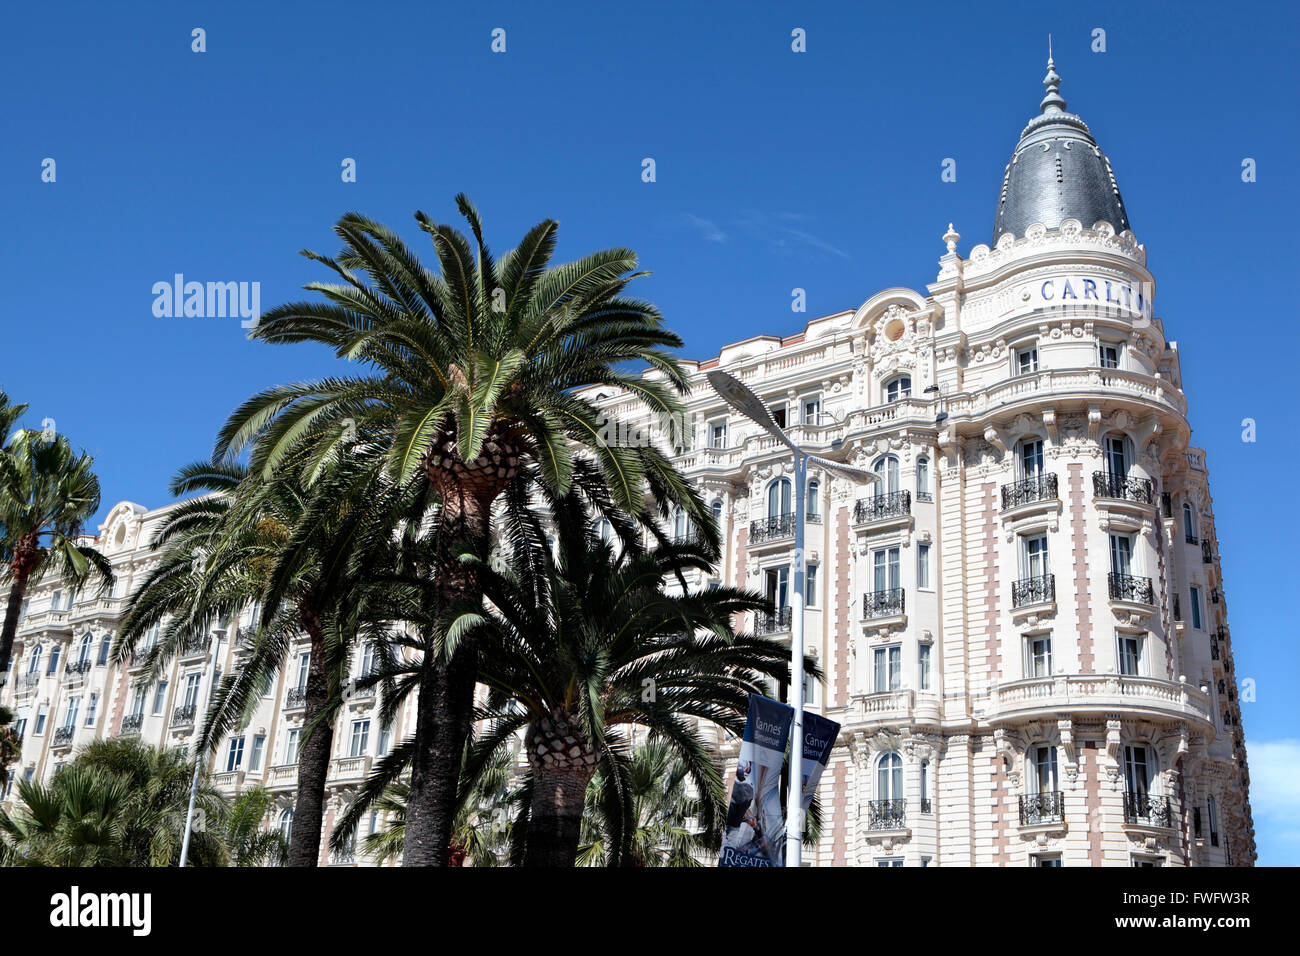 Corner view of the facade and dome of the famous Carlton International Hotel situated on the croisette boulevard in Cannes, Fran Stock Photo